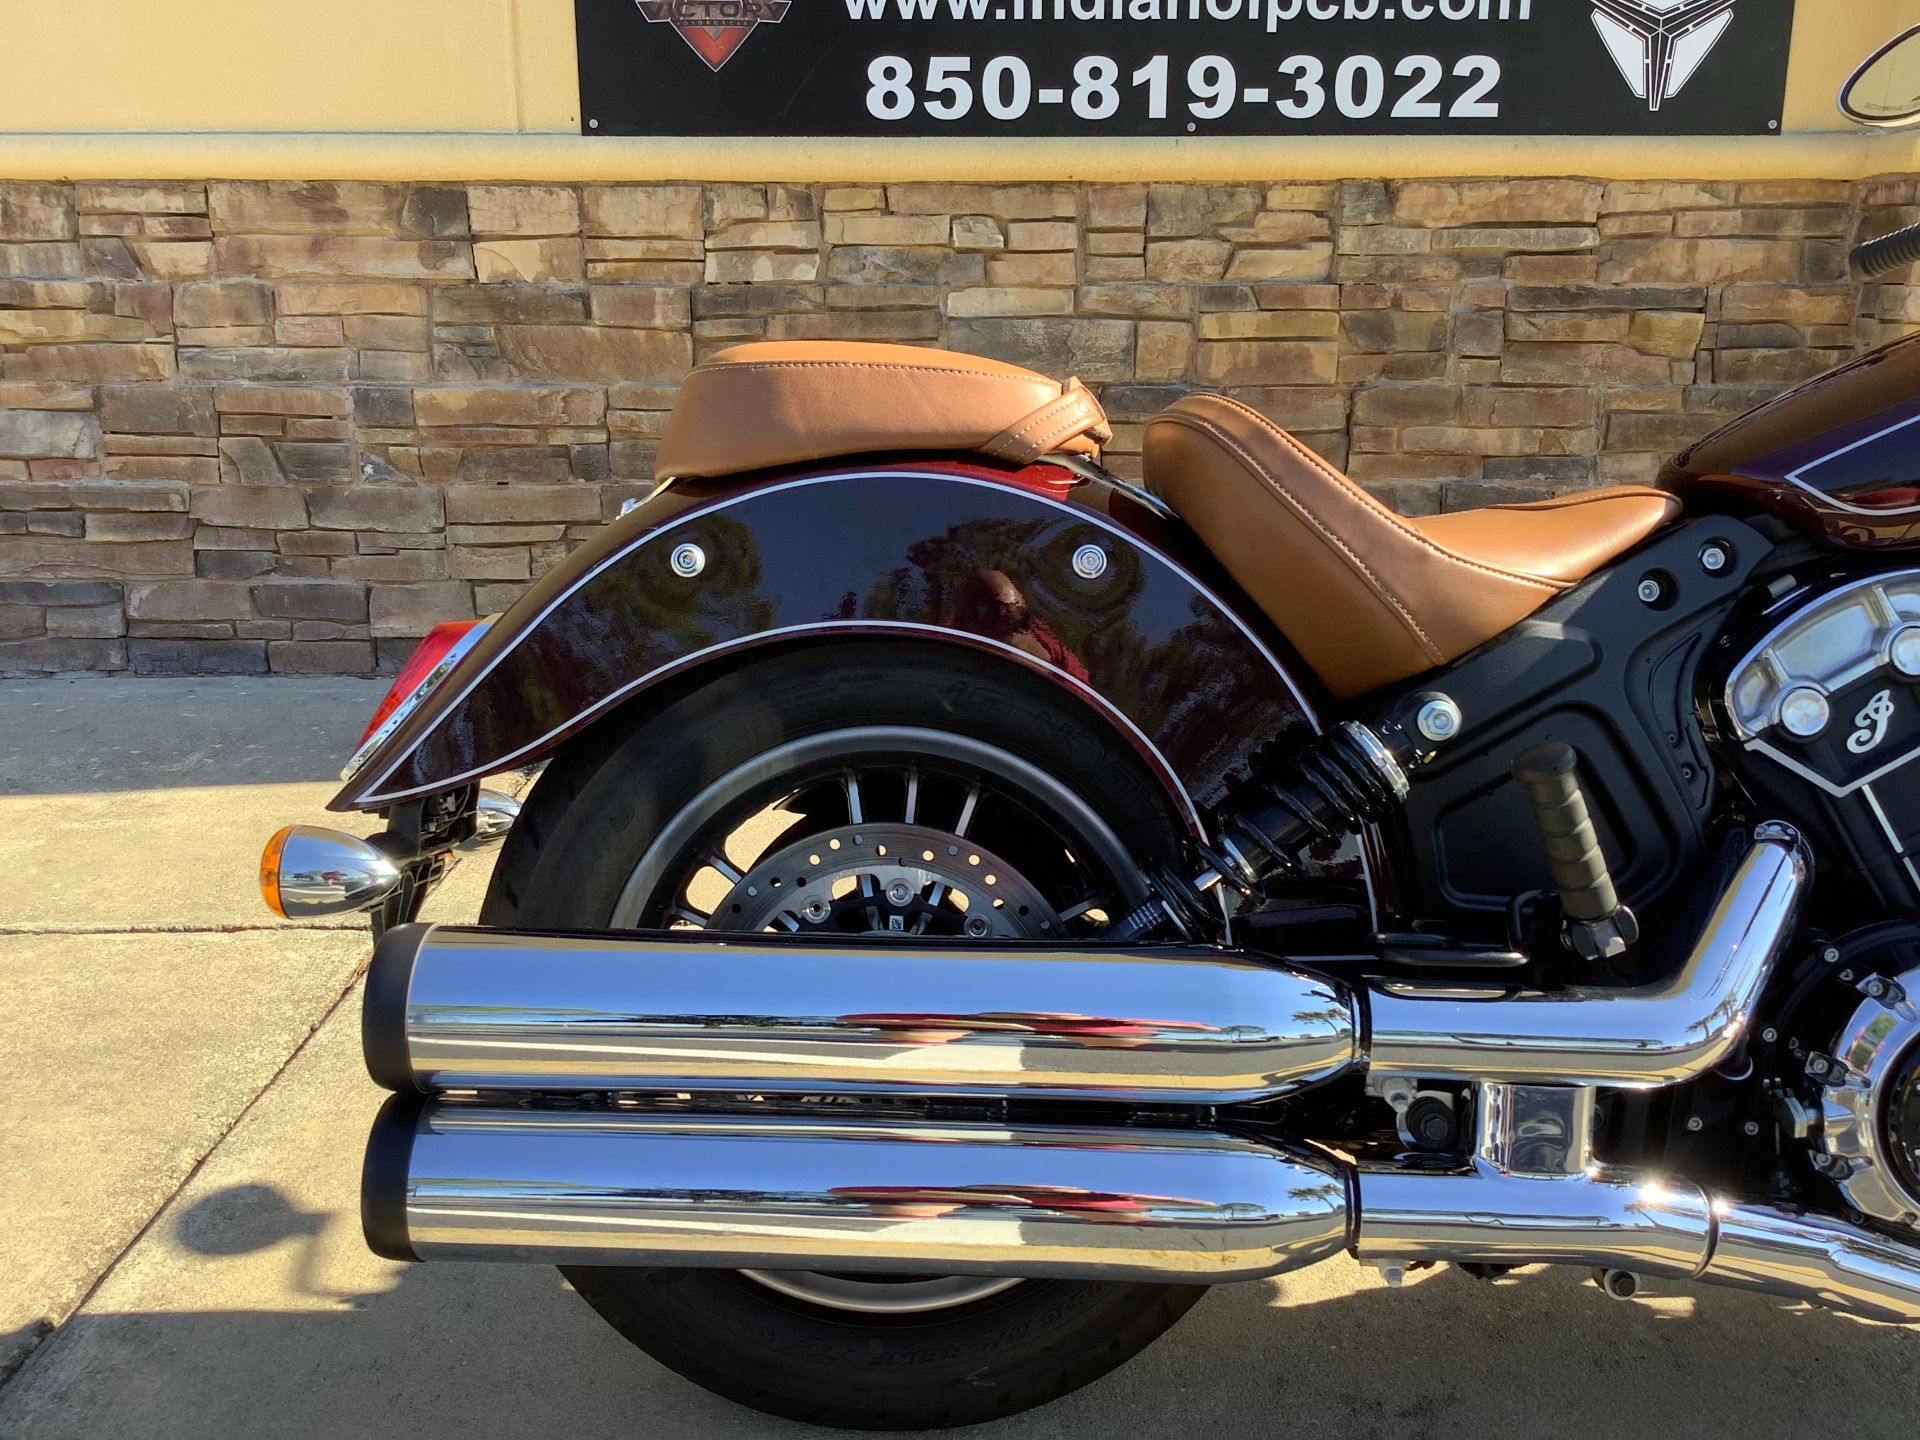 2021 Indian Motorcycle SCOUT ABS TWO TONE in Panama City Beach, Florida - Photo 9